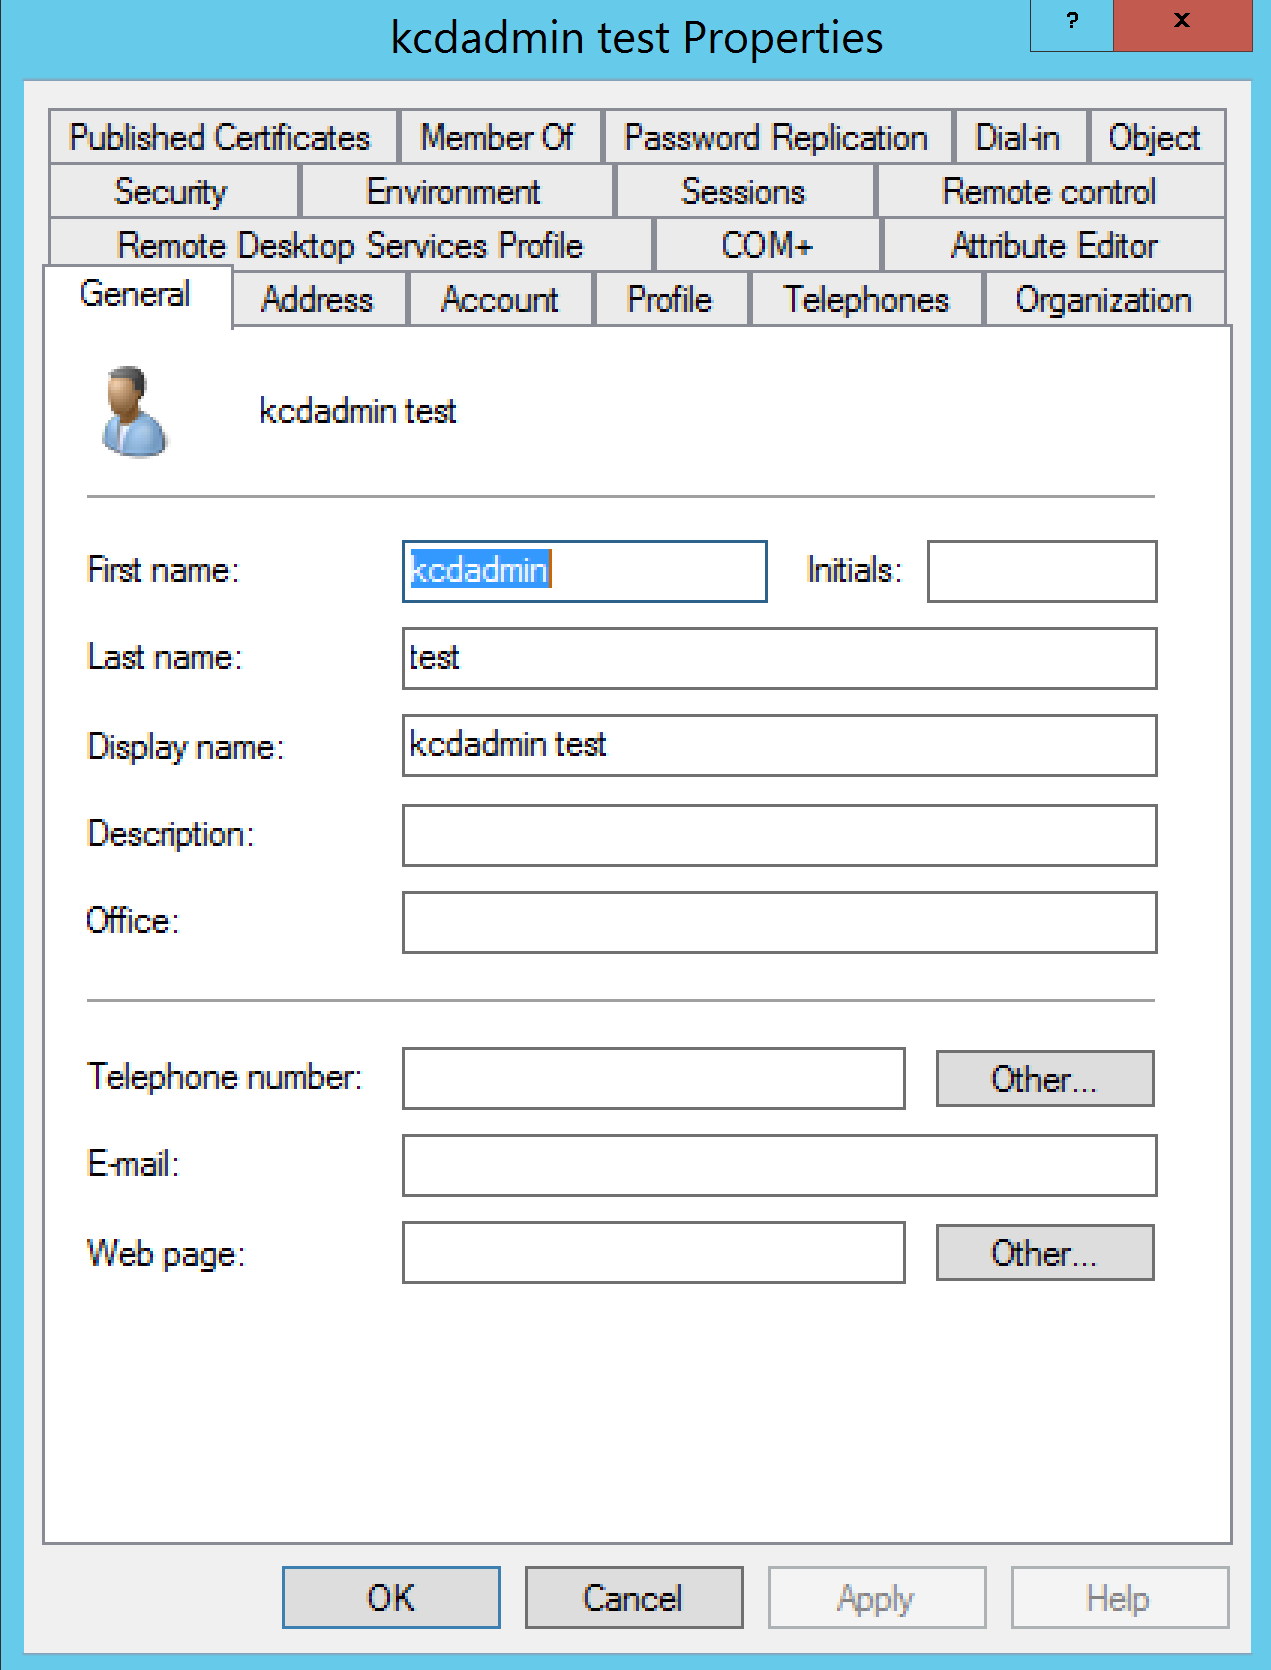 Create account in active directory